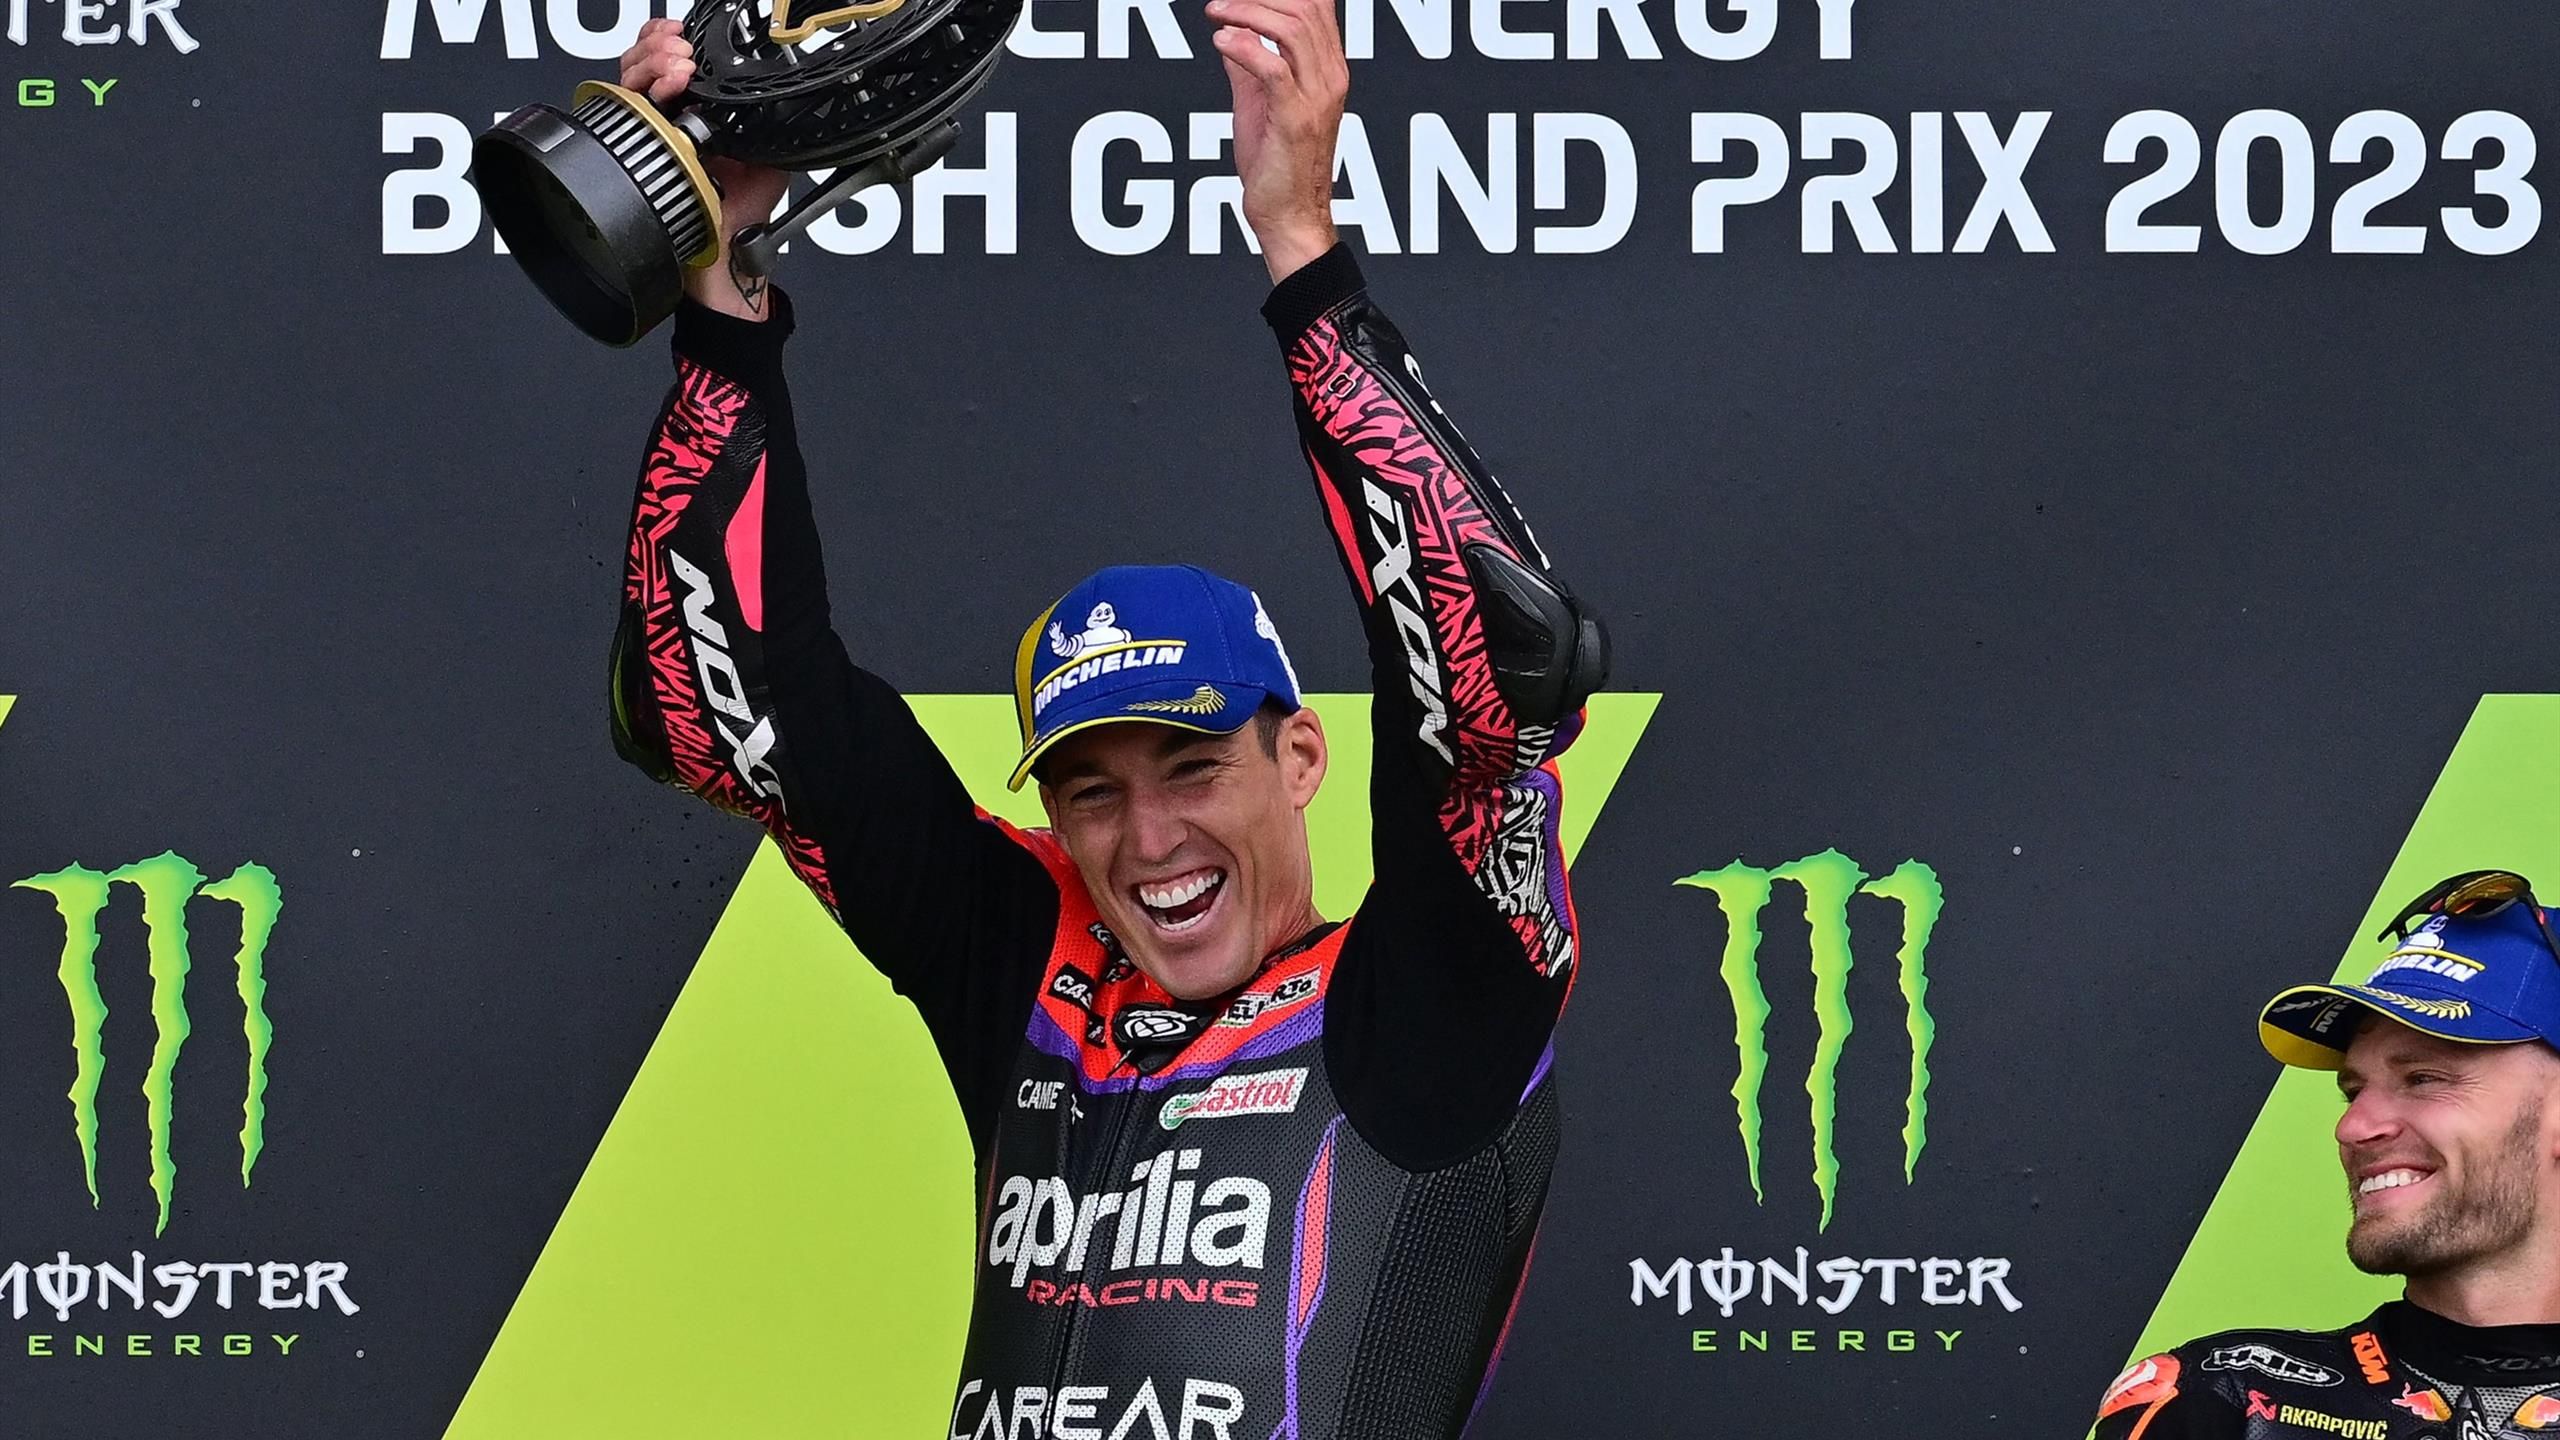 One of those days where you feel invincible - Aleix Espargaro revels in MotoGP win at Silverstone